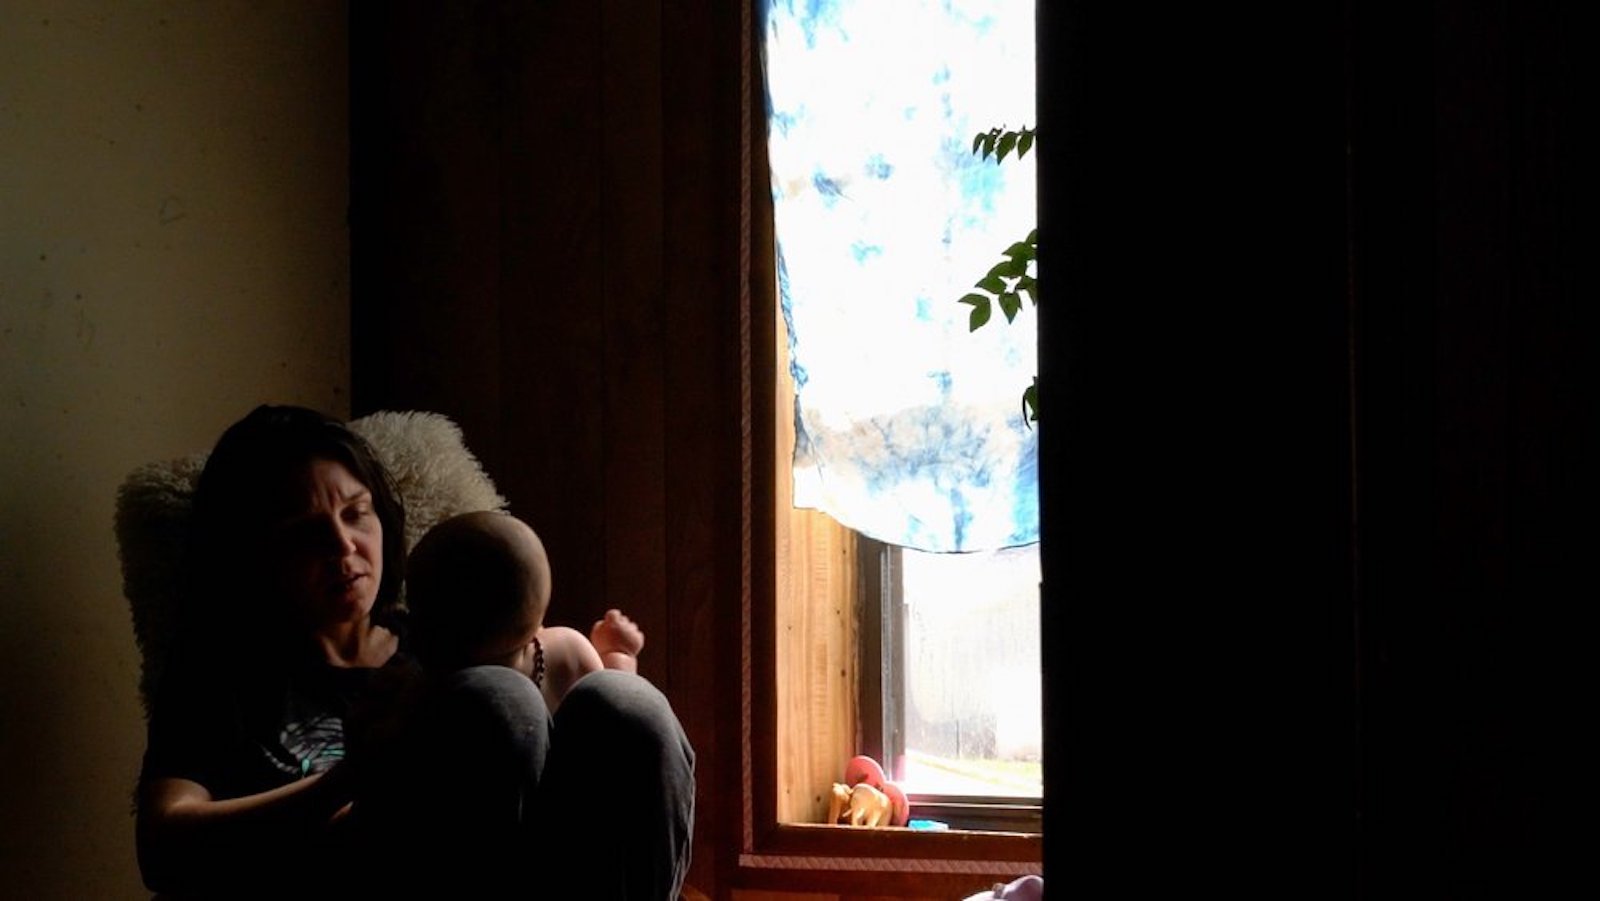 A woman holds a baby in a dark room near a window with daylight pouring in